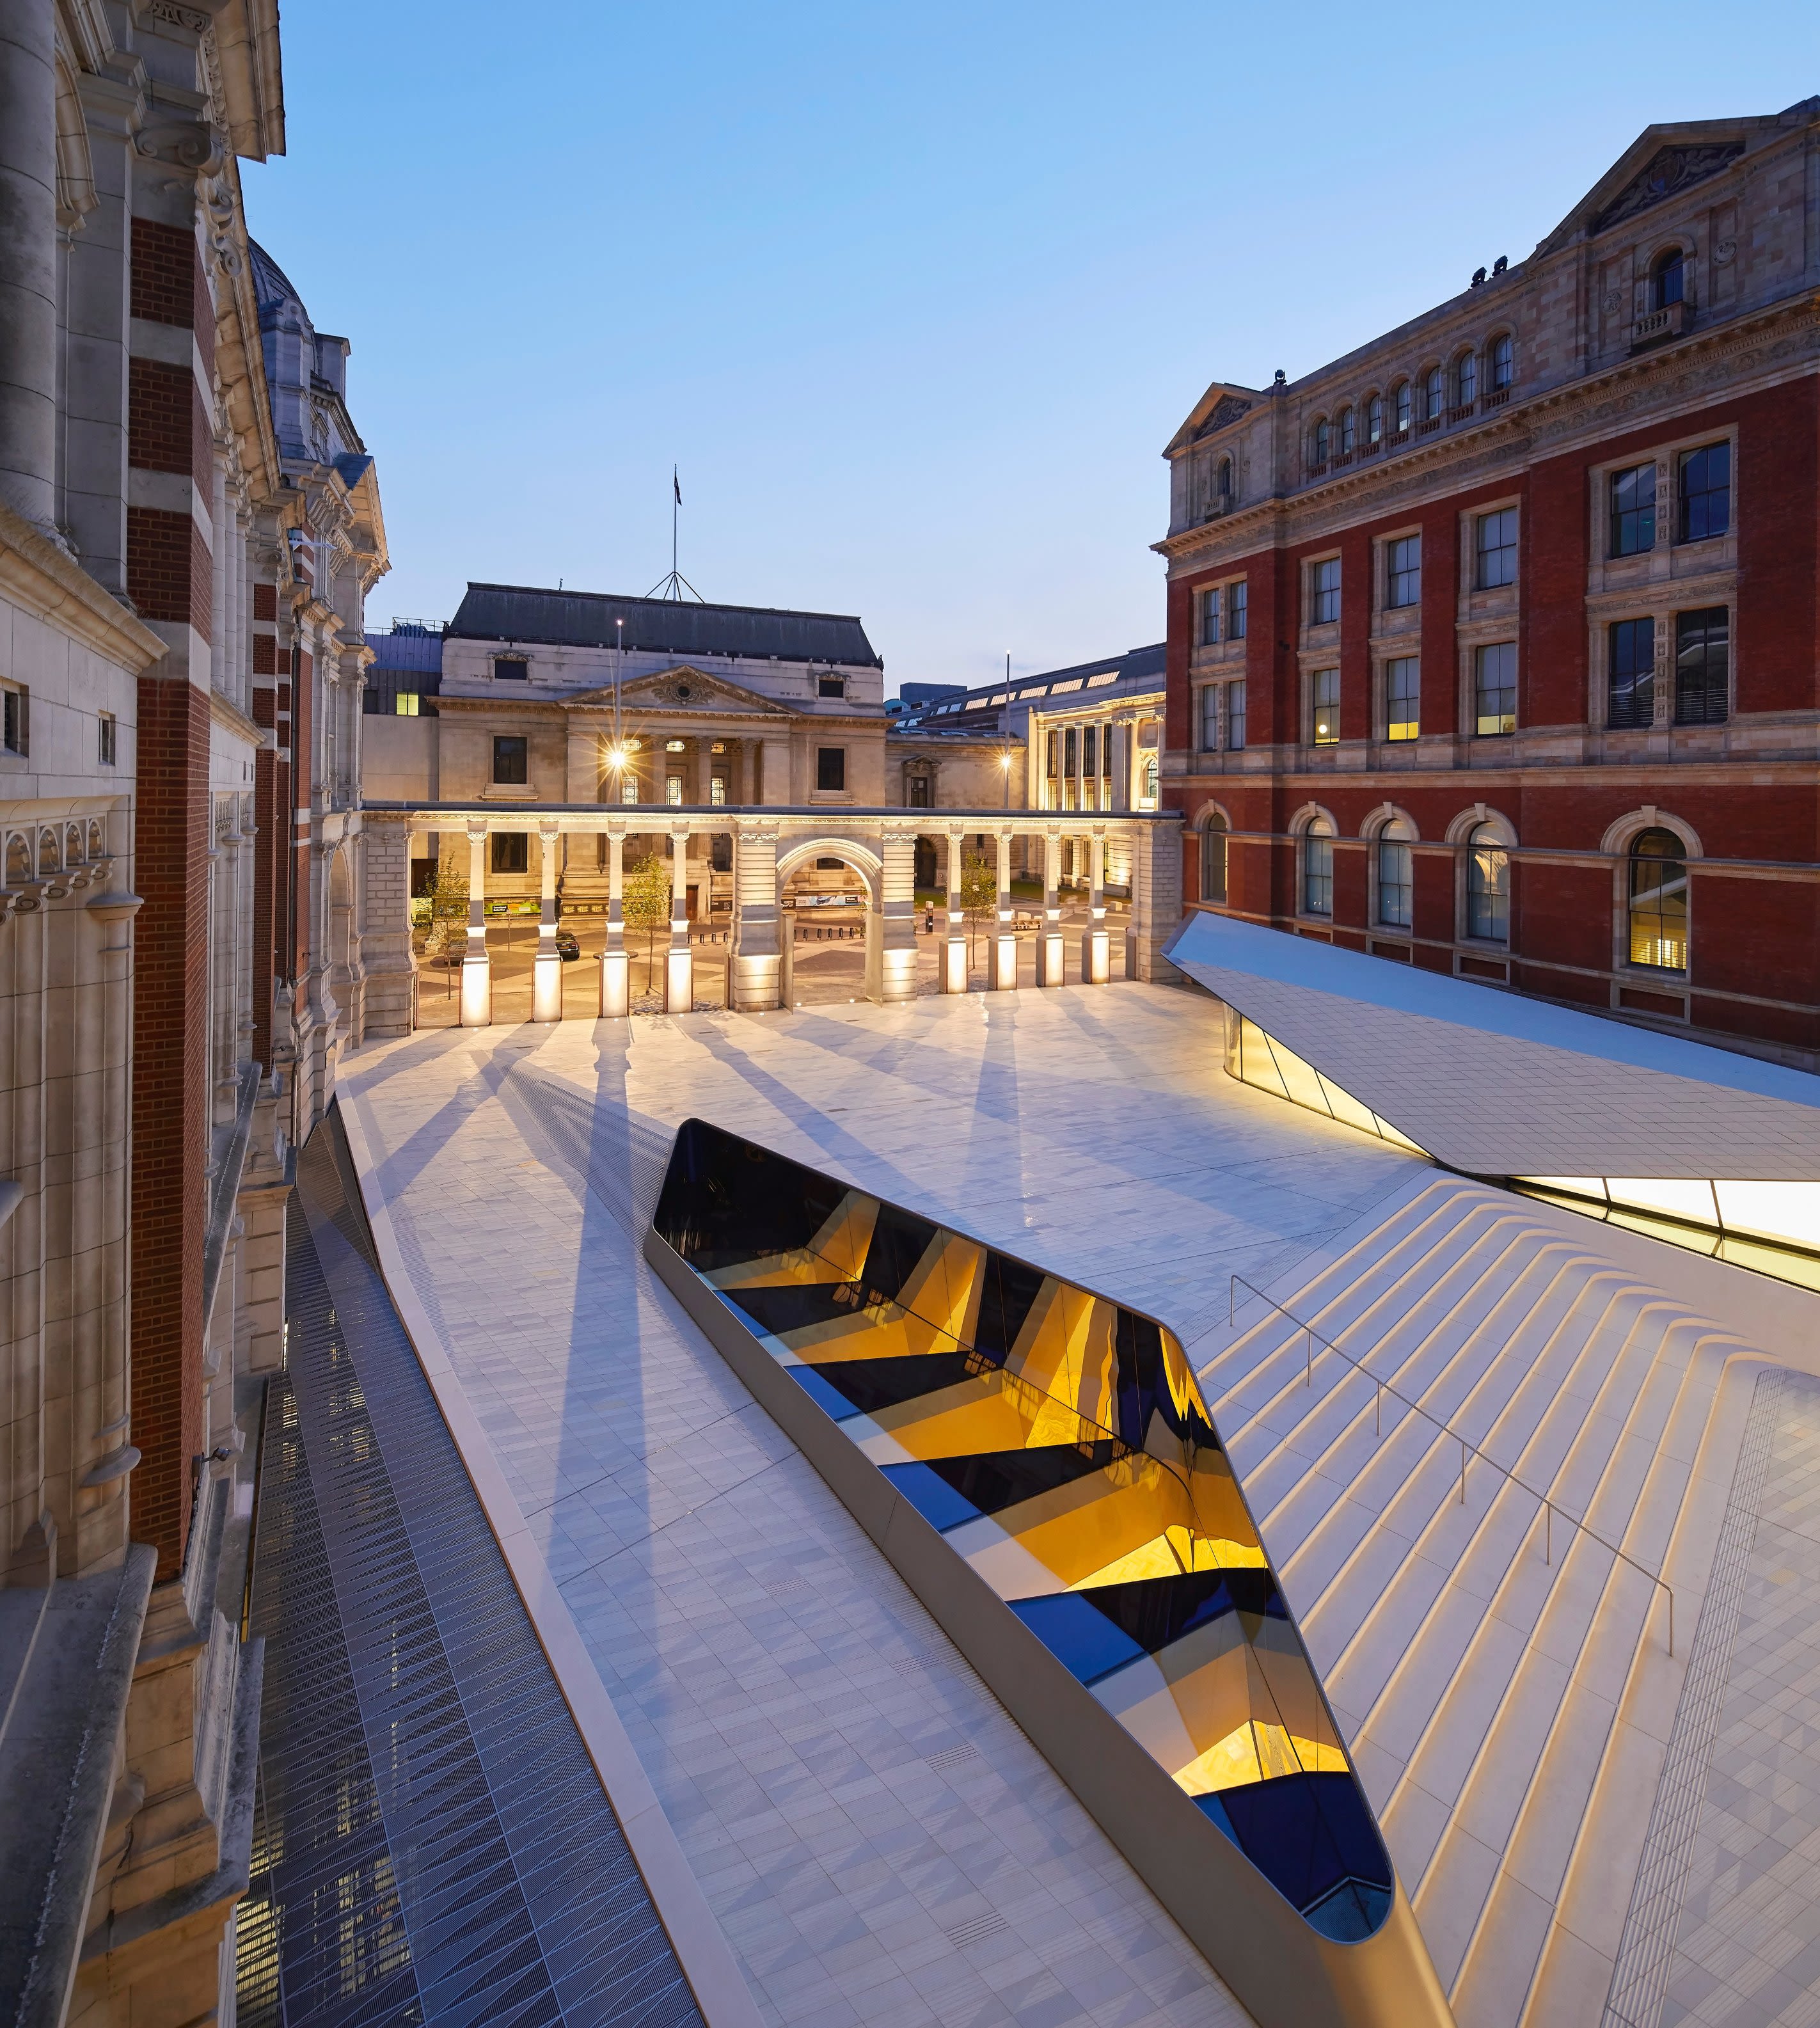 Victoria and Albert Museum opens porcelain courtyard